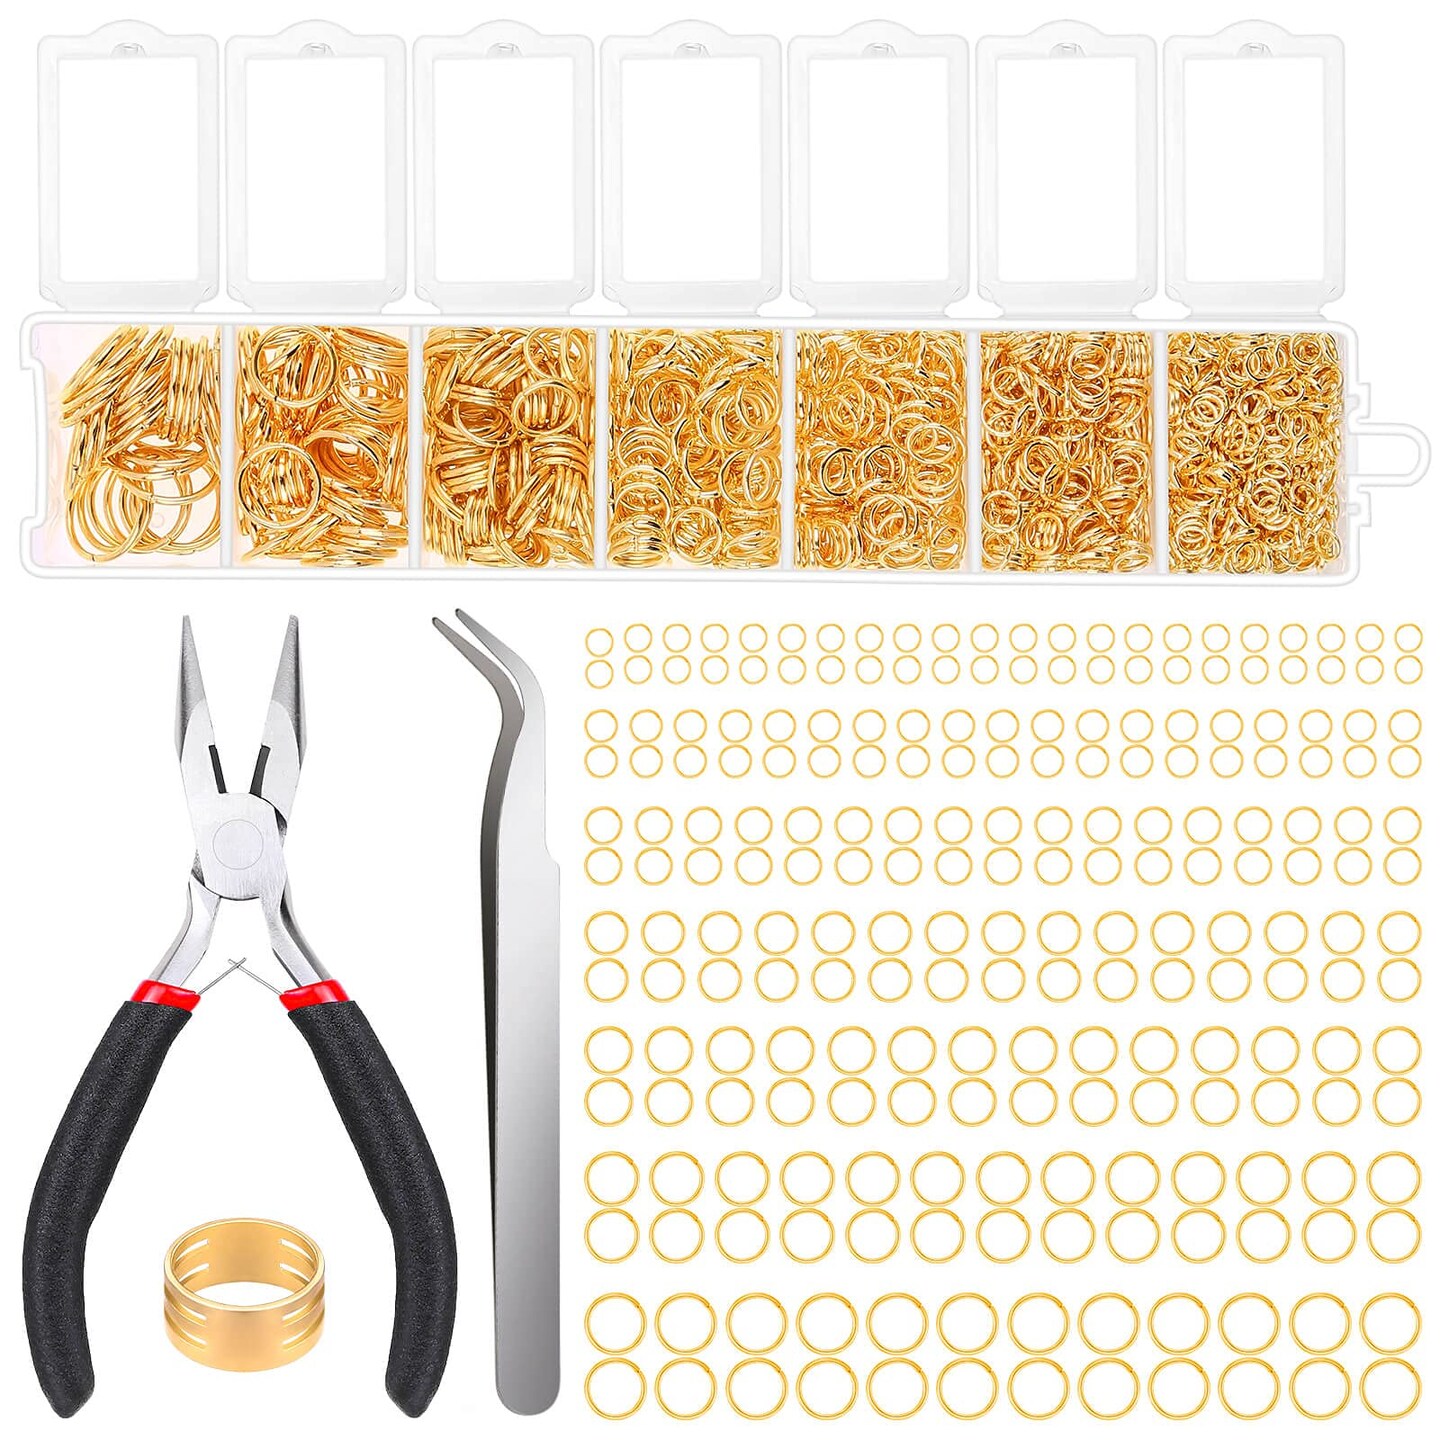 Gold Jump Rings for Jewelry Making, Paxcoo 1500Pcs Jewelry Necklace Repair Kit with Jewelry Making Supplies and Jewelry Pliers for Bangle Charms, Earrings and Nail Piercing